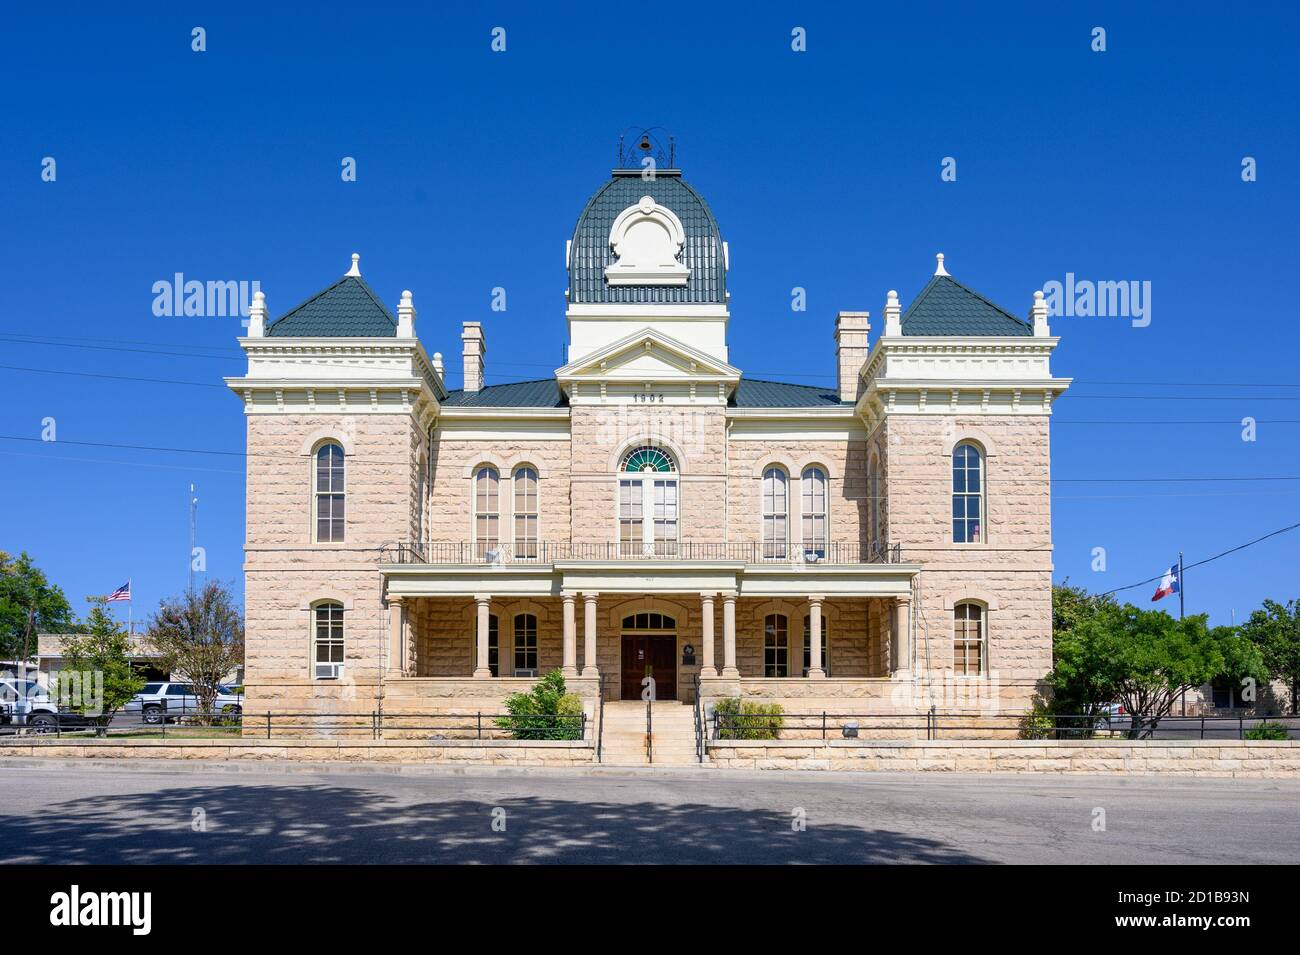 Town Square and Historic Crockett County Courthouse built in 1902. Ozona City in Crockett County in West Texas, United States Stock Photo